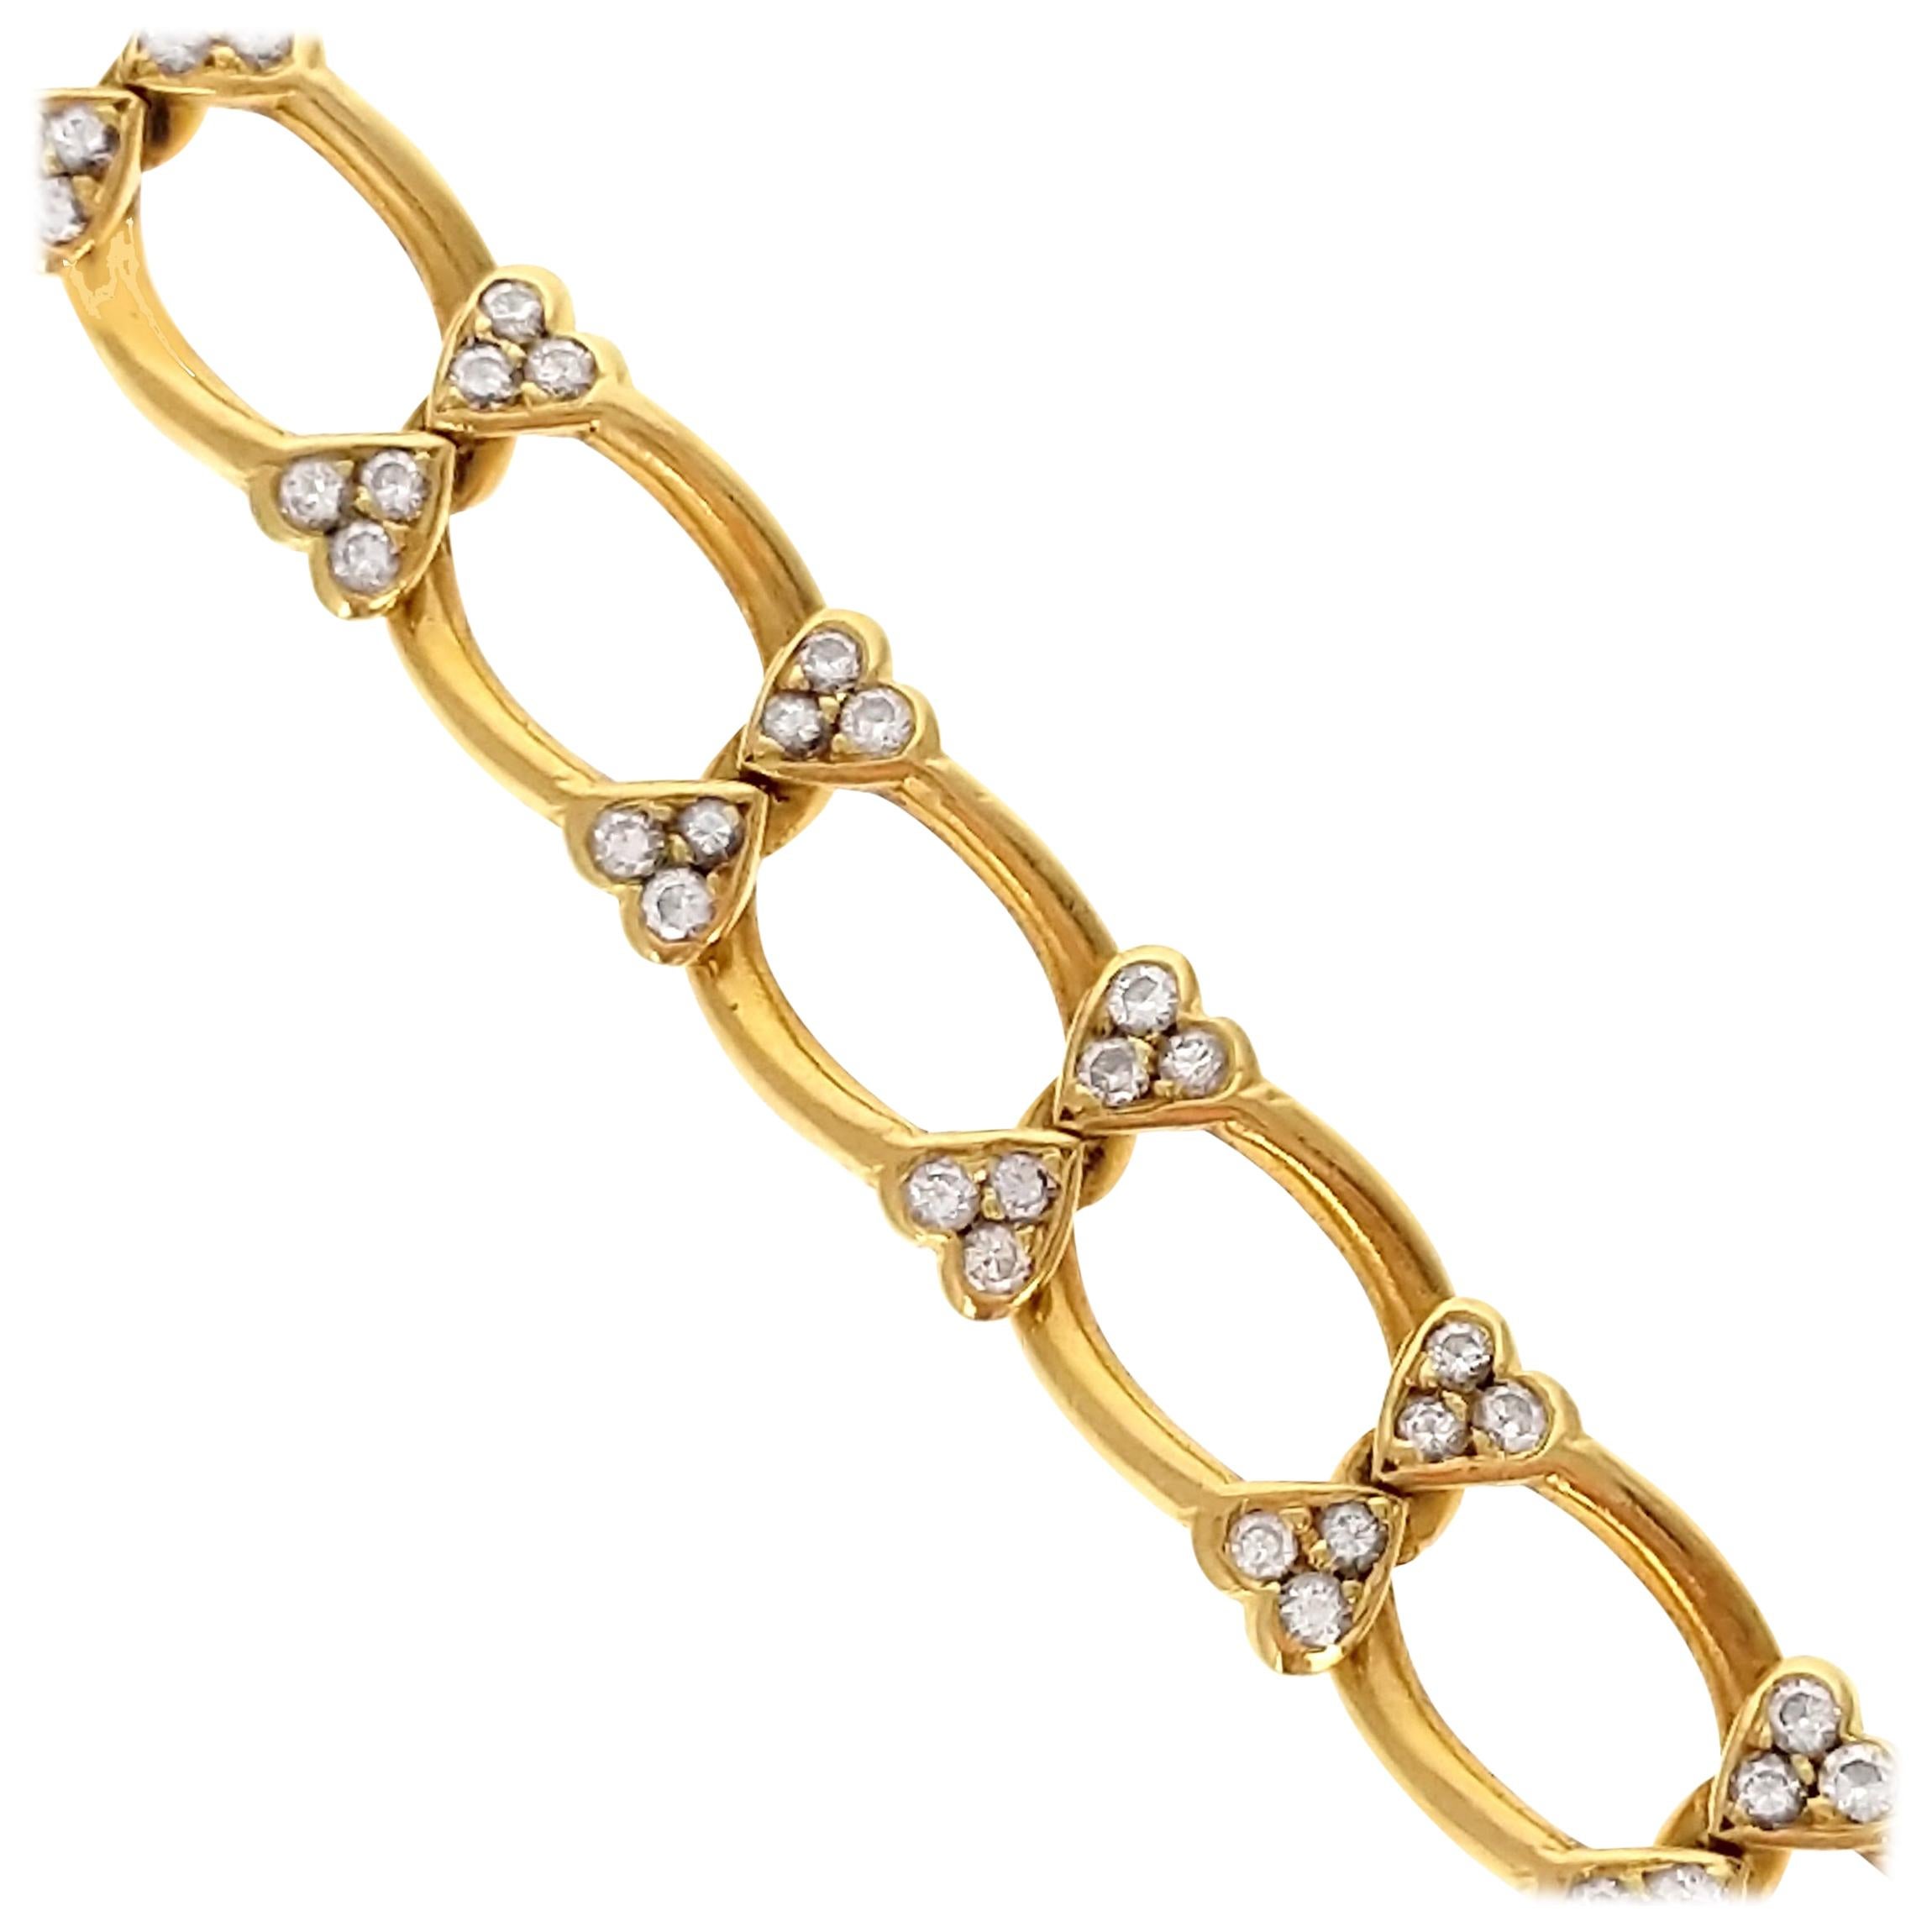 Van Cleef & Arpels 1970s Gold and Diamond Link Bracelet, French